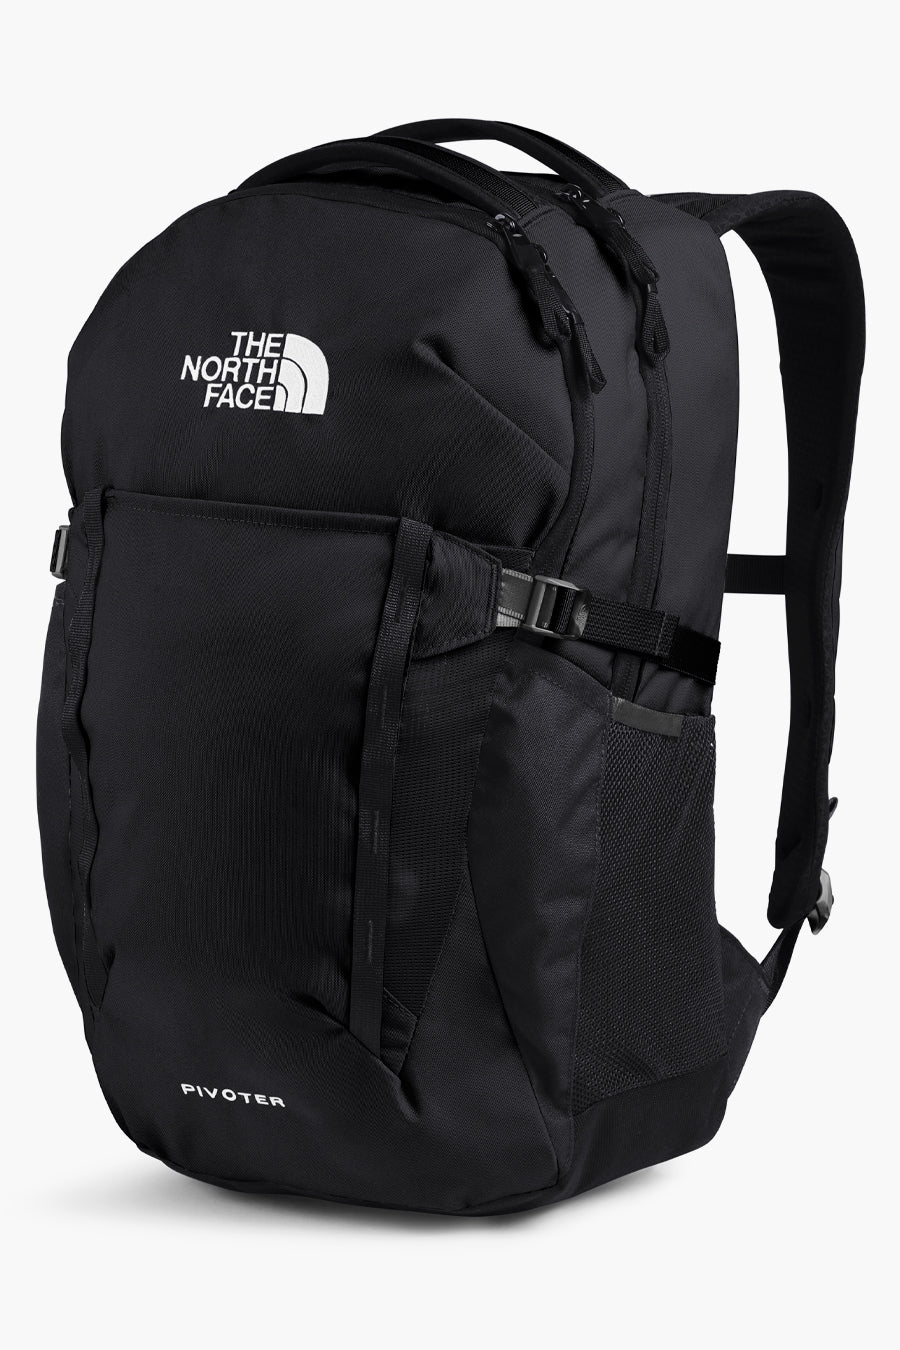 THE NORTH FACE PIVOTERリュック NF00CHJ8